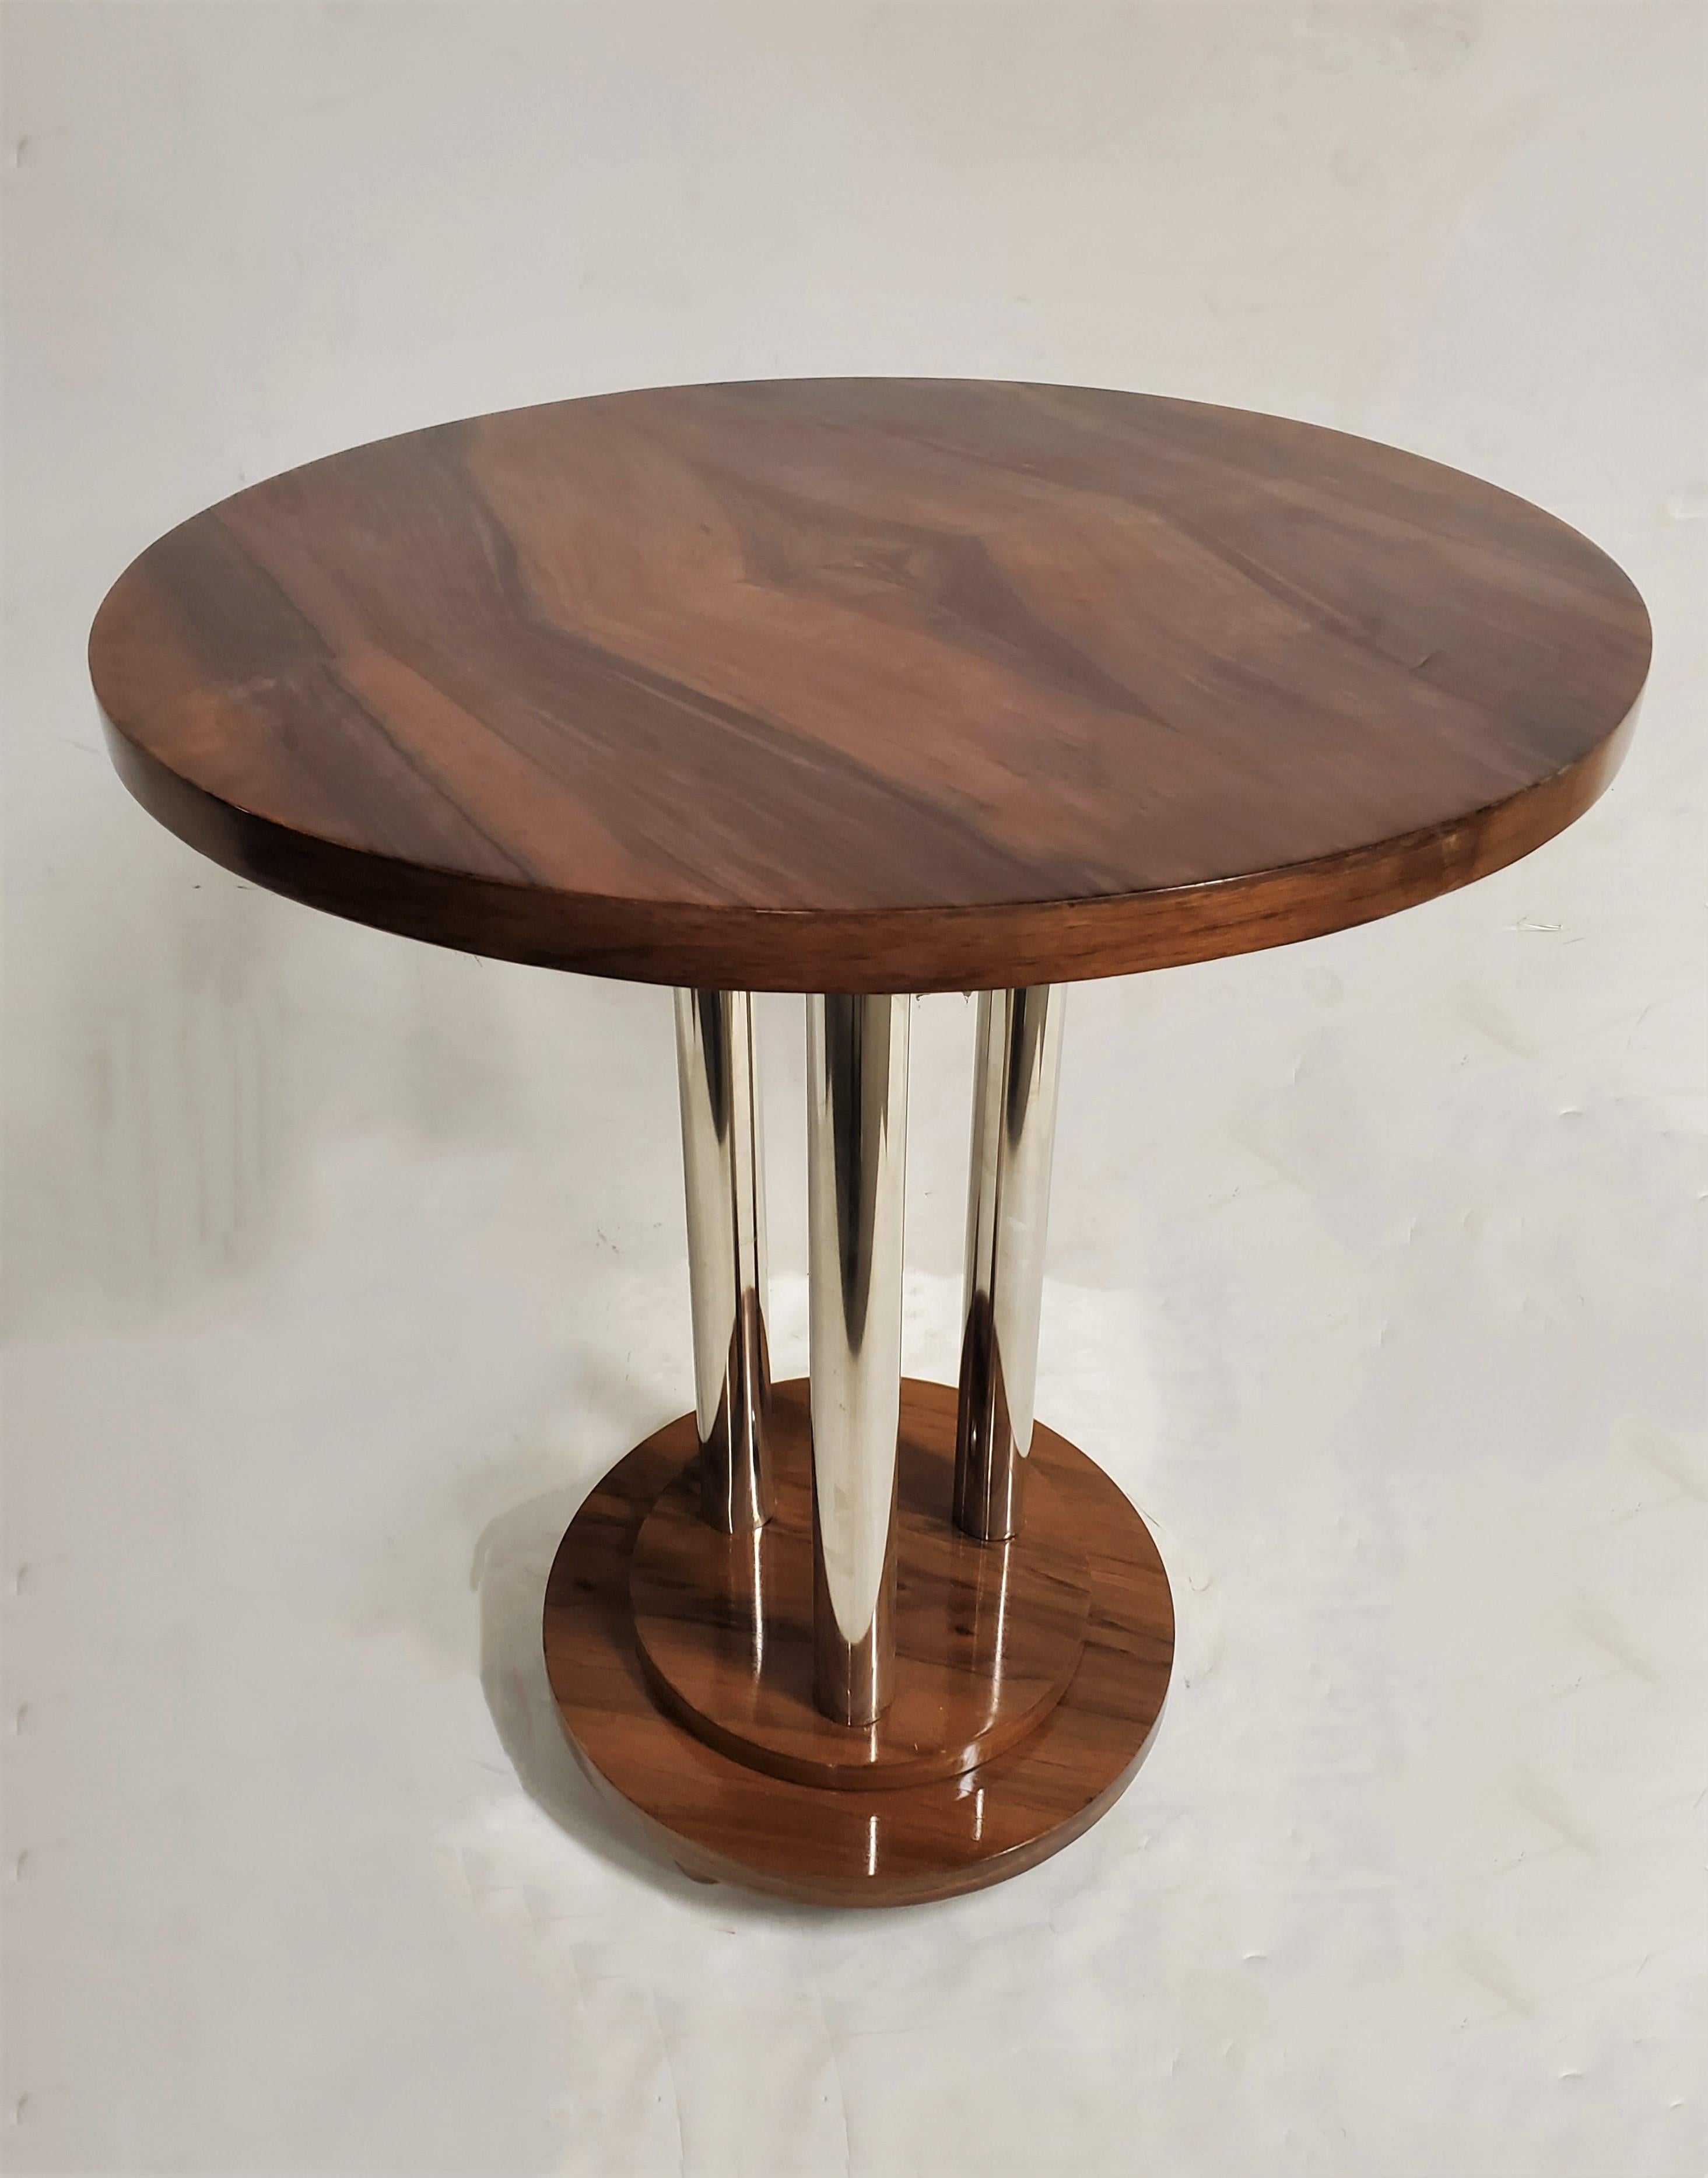 A French Art Deco walnut side table highlighted by metal accents. Three tubular metal poles support a beautifully grained, book matched circular wood top with a geometric diamond shape pattern, that rest on a circular stepped base ending with small